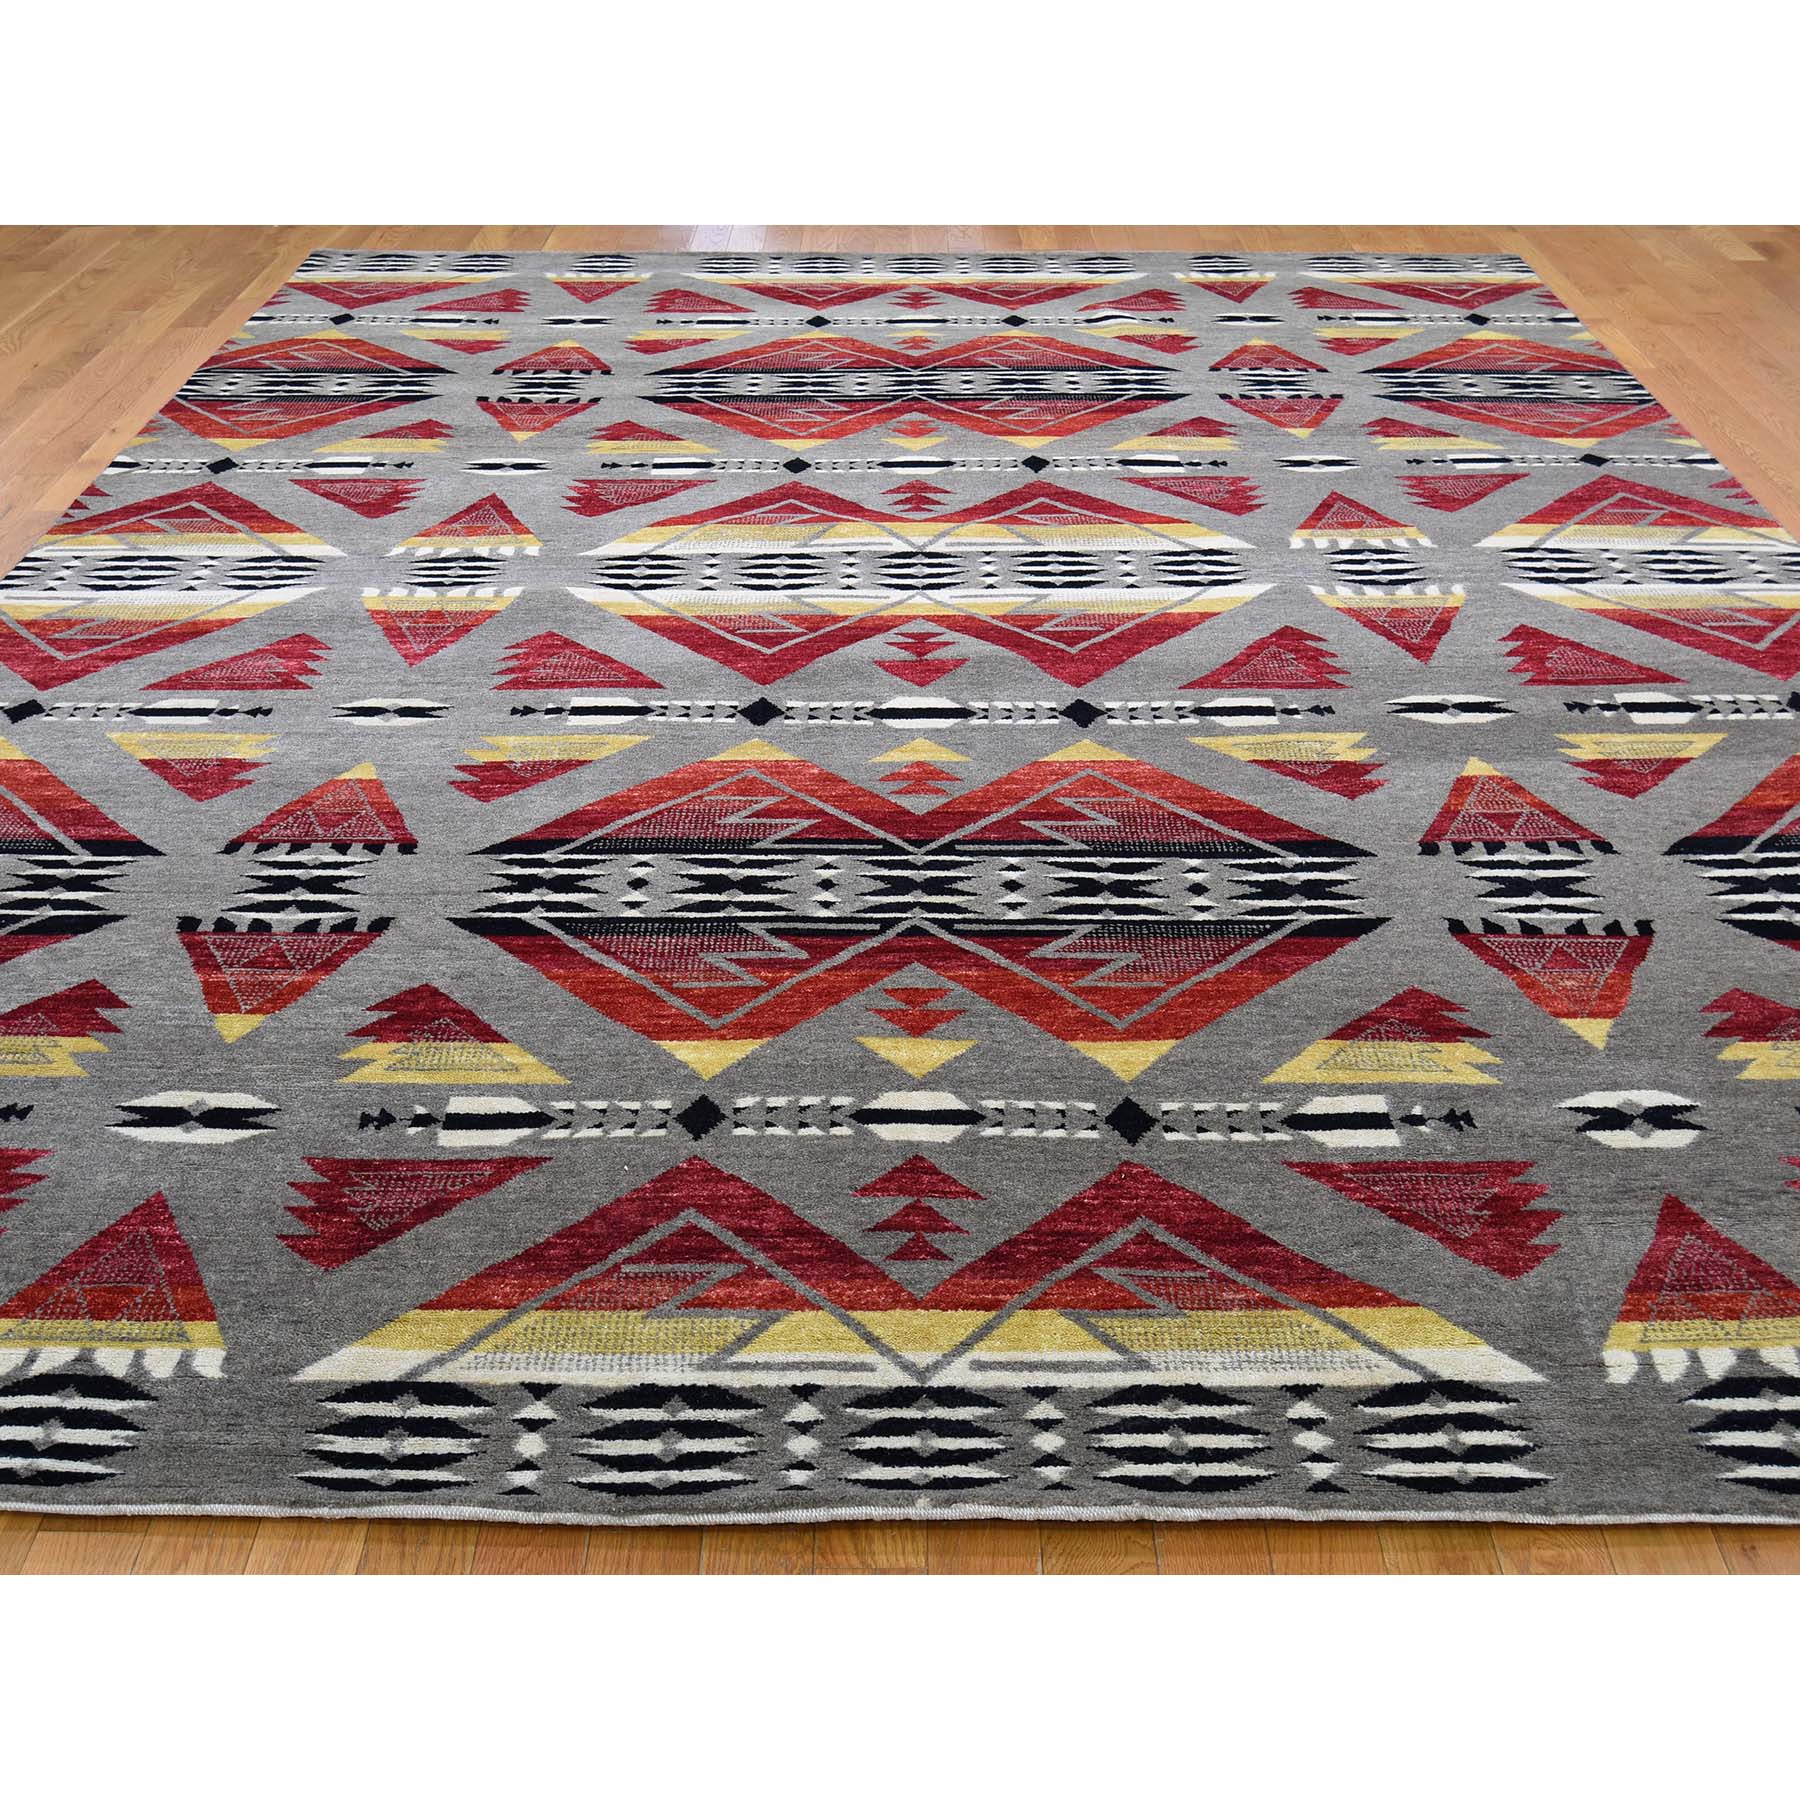 8-10 x12- Hand-Knotted Southwestern Design Pure Wool Oriental Rug 